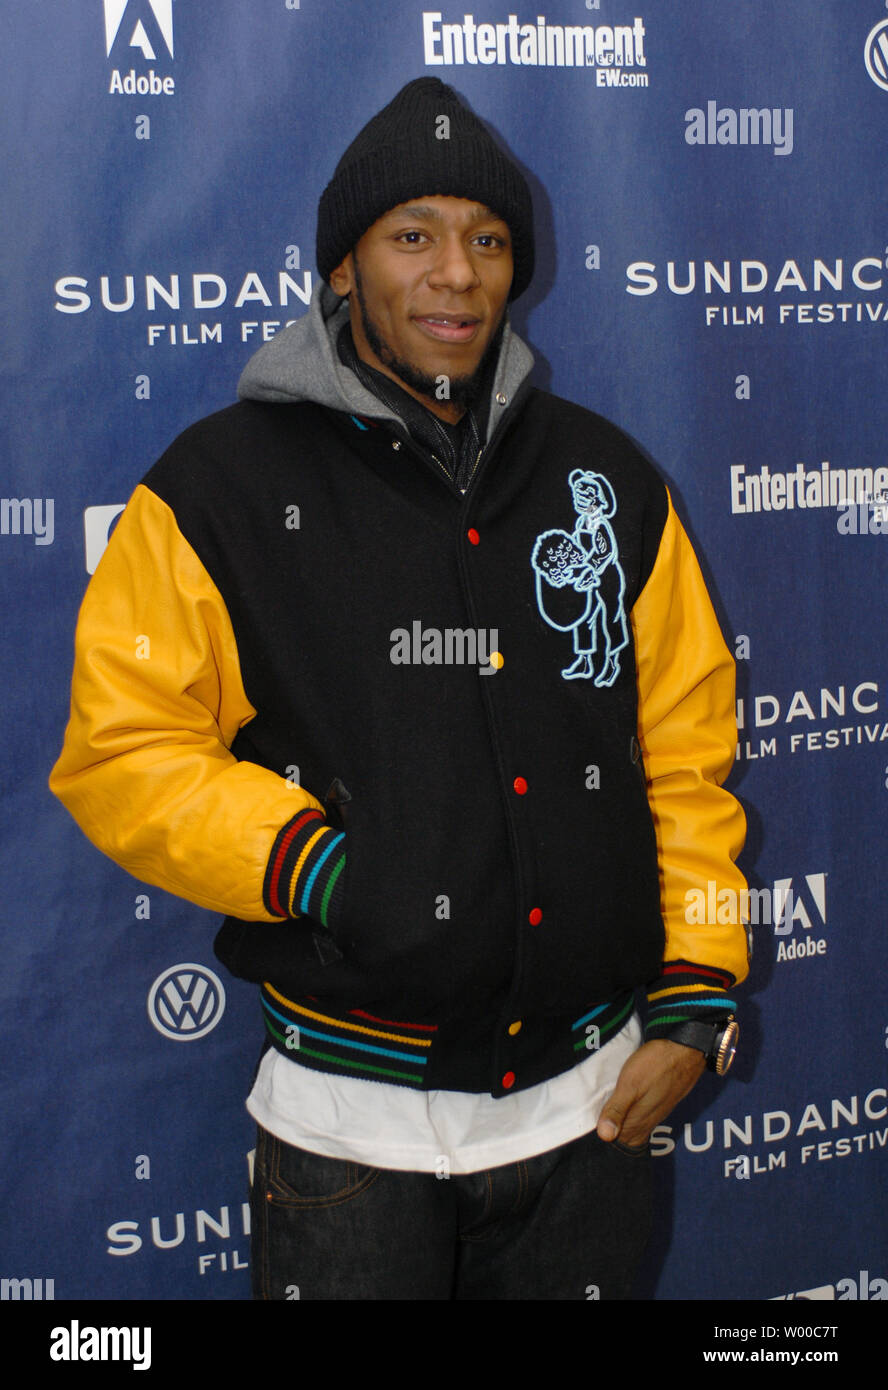 Pictures of Mos Def, Picture #346585 - Pictures Of Celebrities